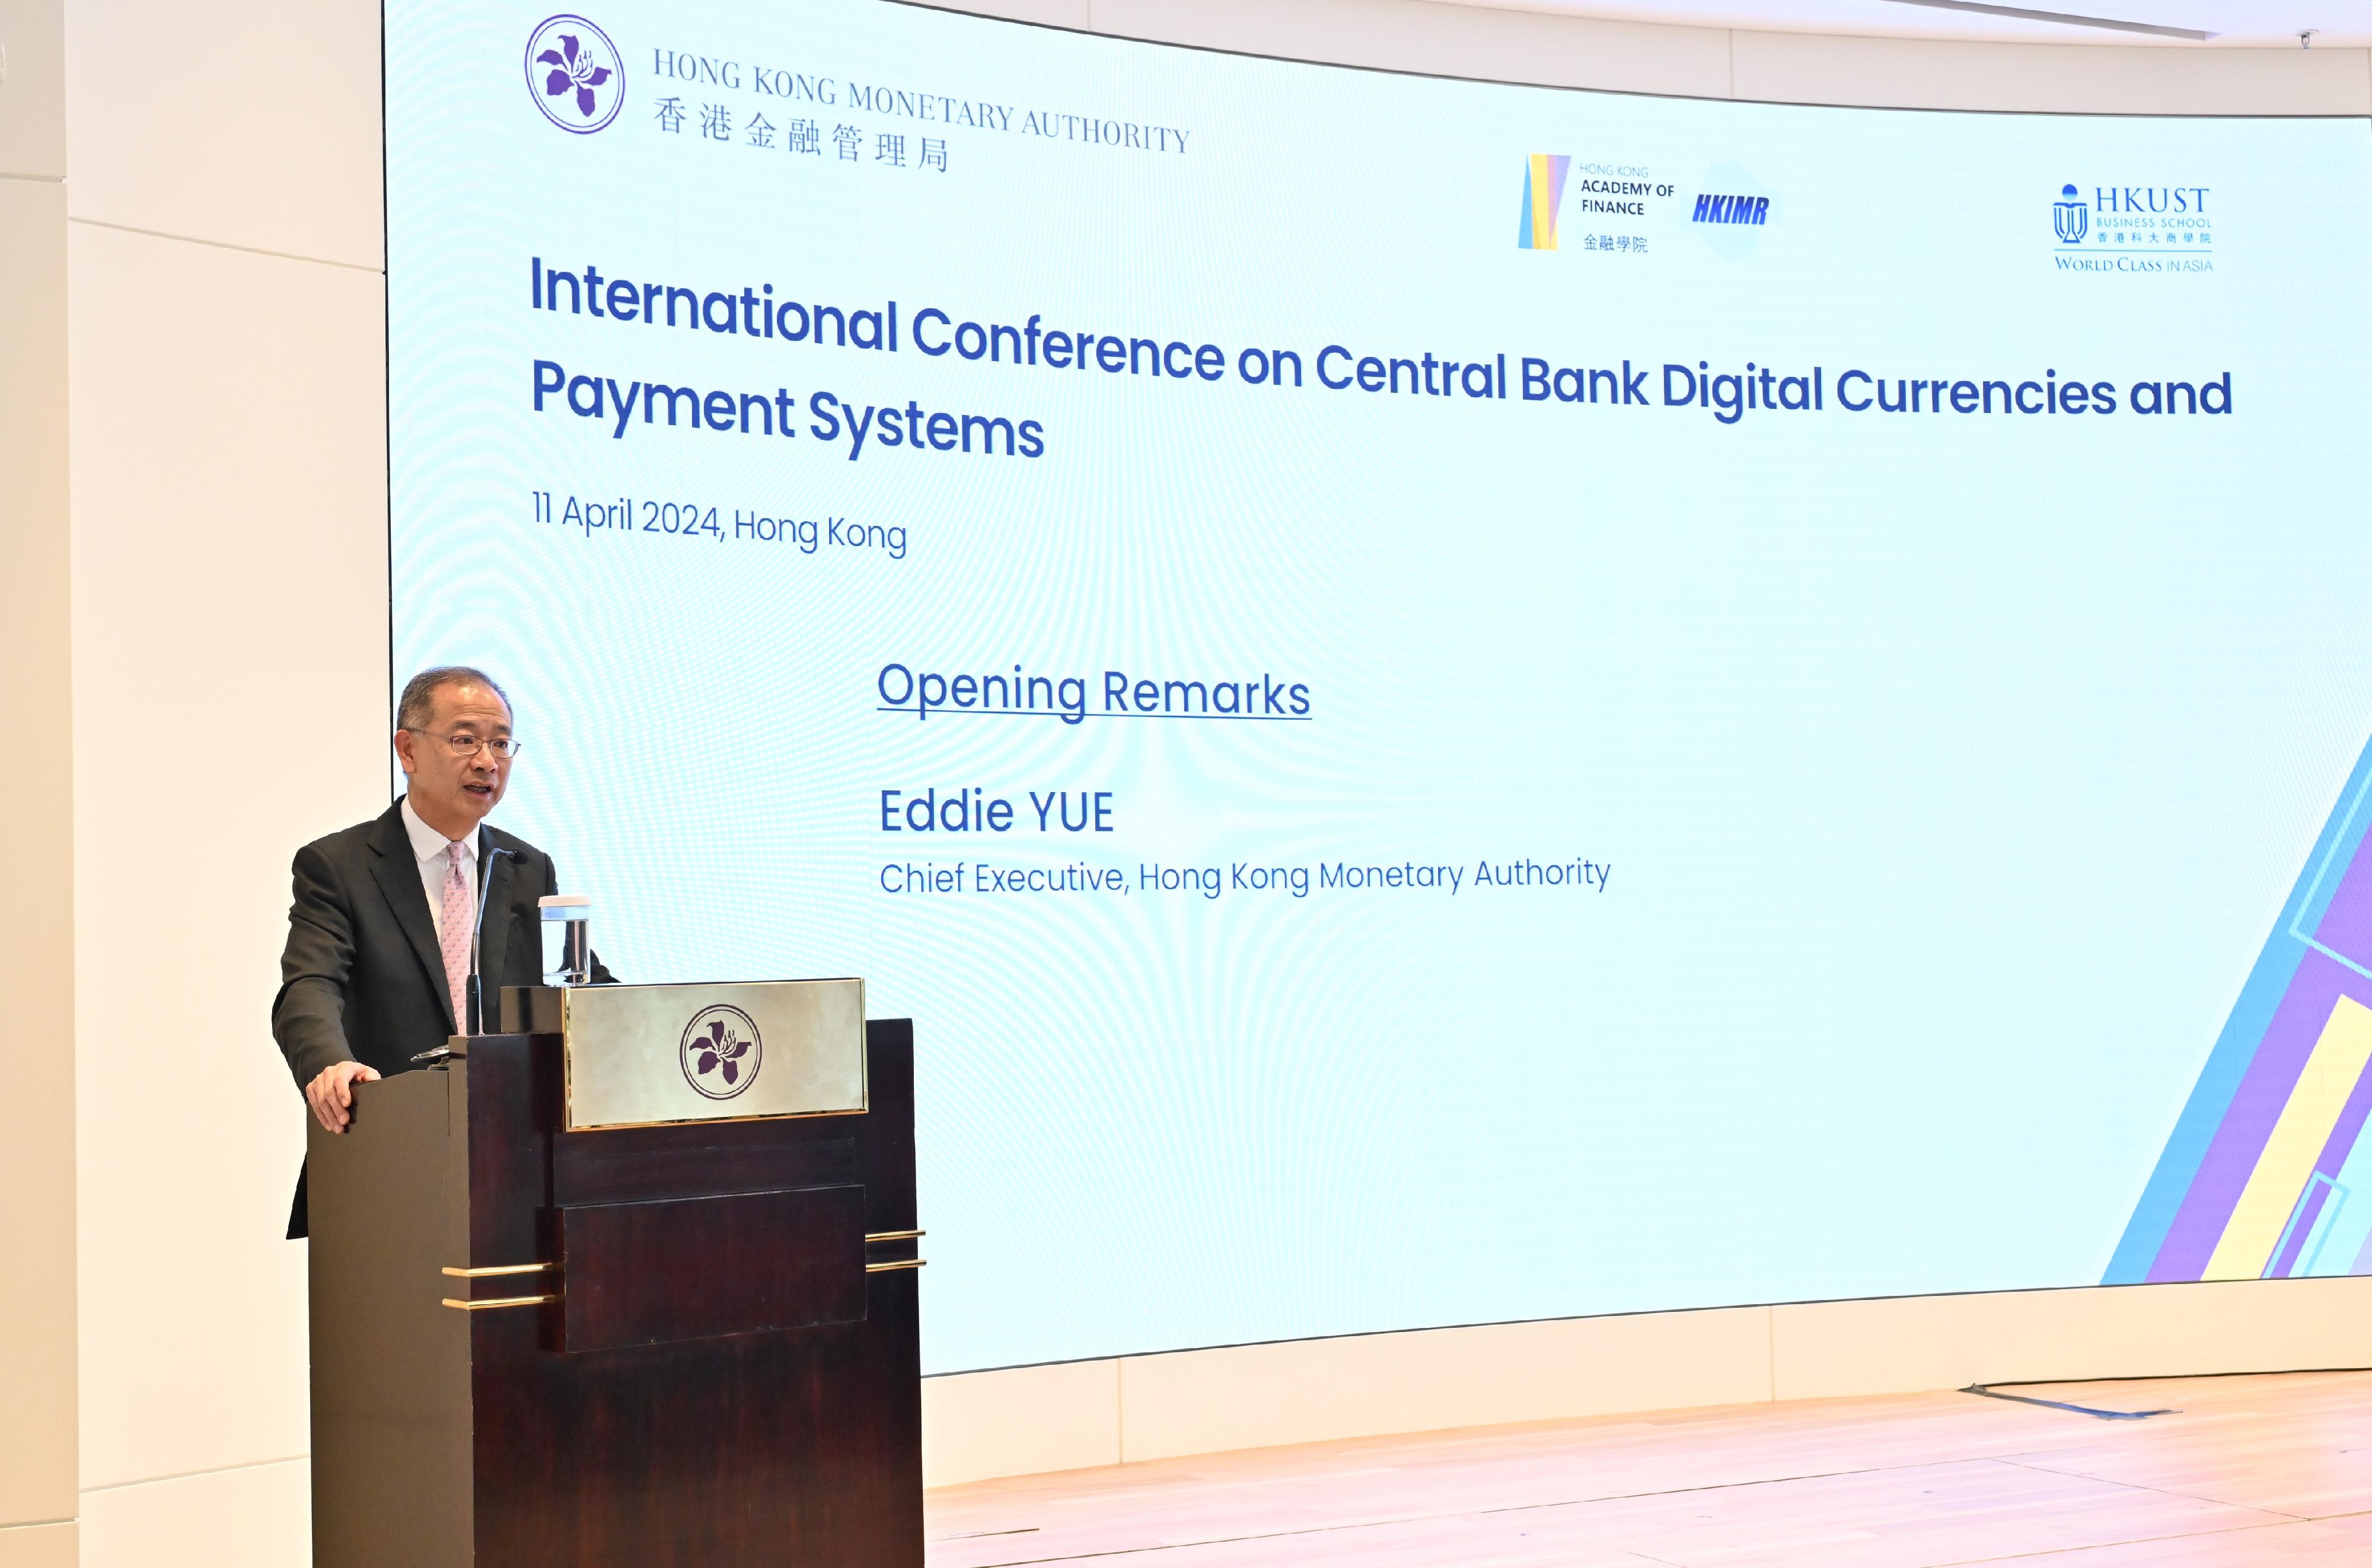 The Chief Executive of the Hong Kong Monetary Authority, Mr Eddie Yue, delivers a keynote speech at the International Conference on Central Bank Digital Currencies and Payment Systems.